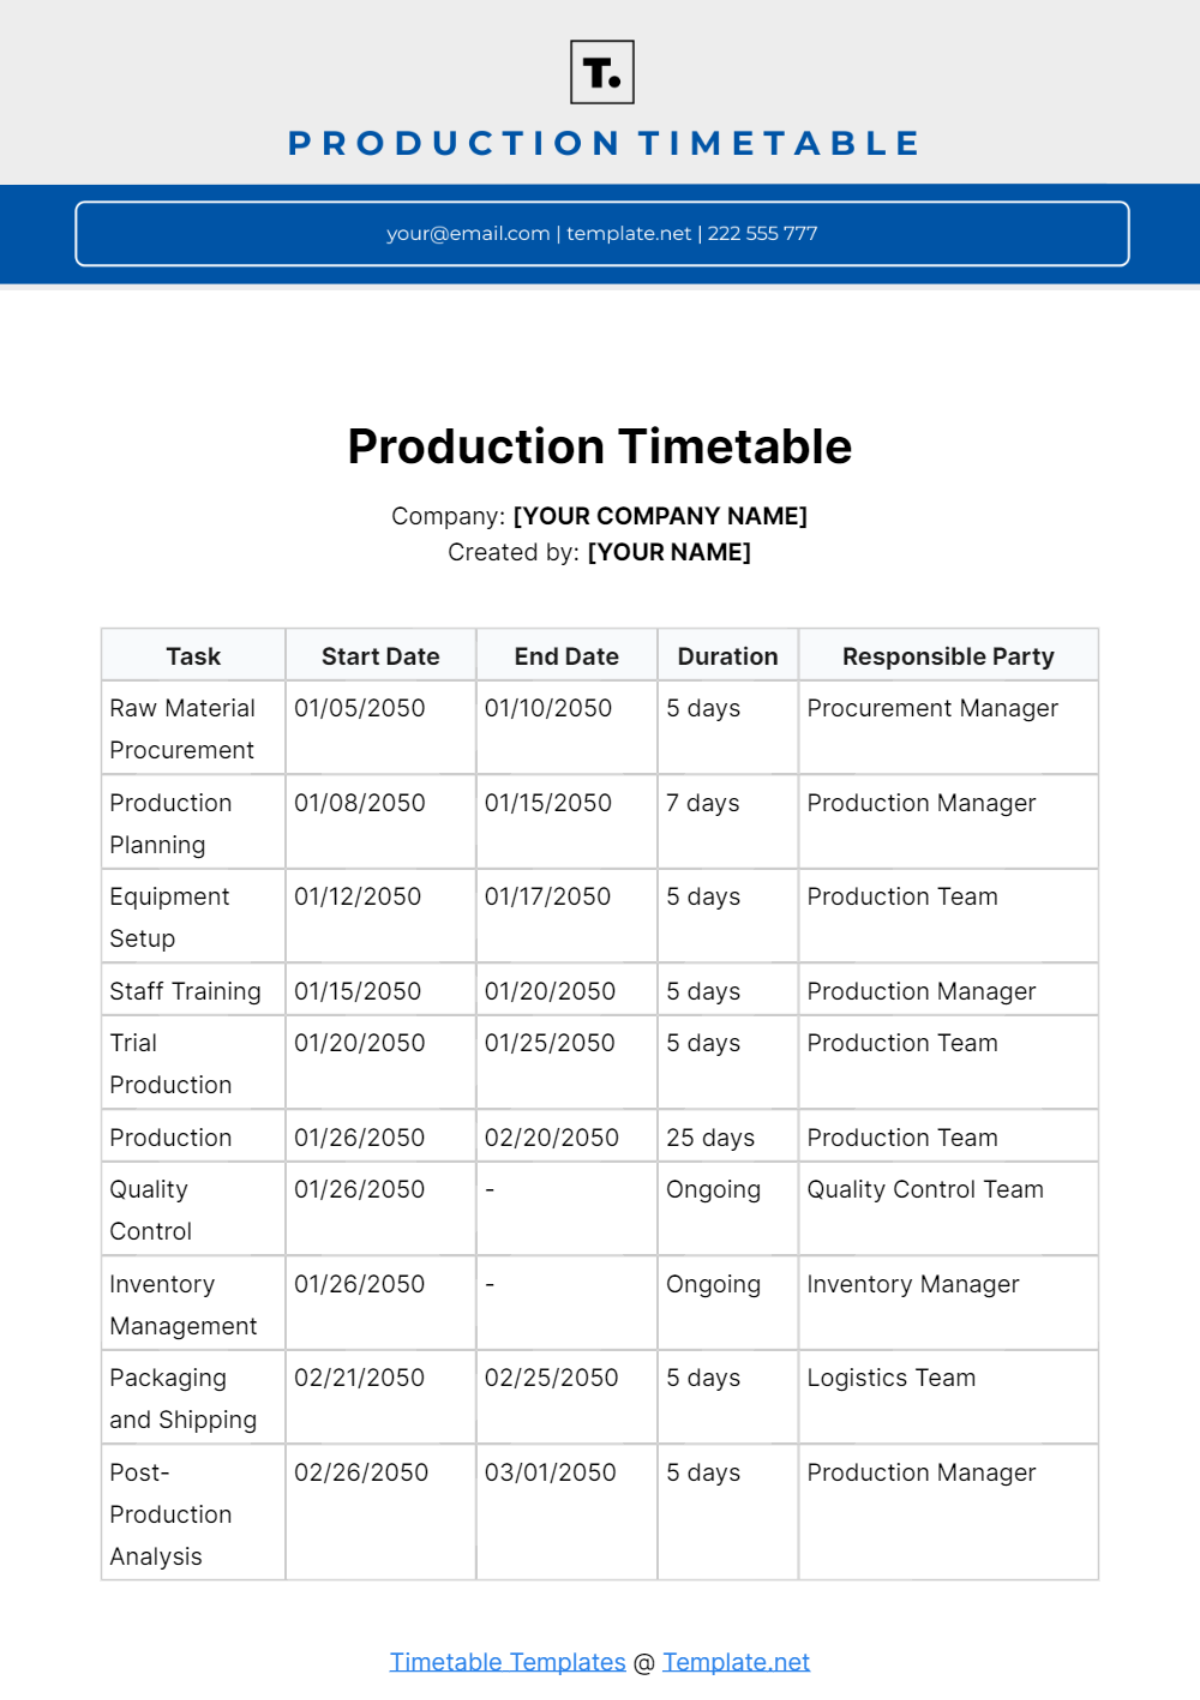 Free Production Timetable Template